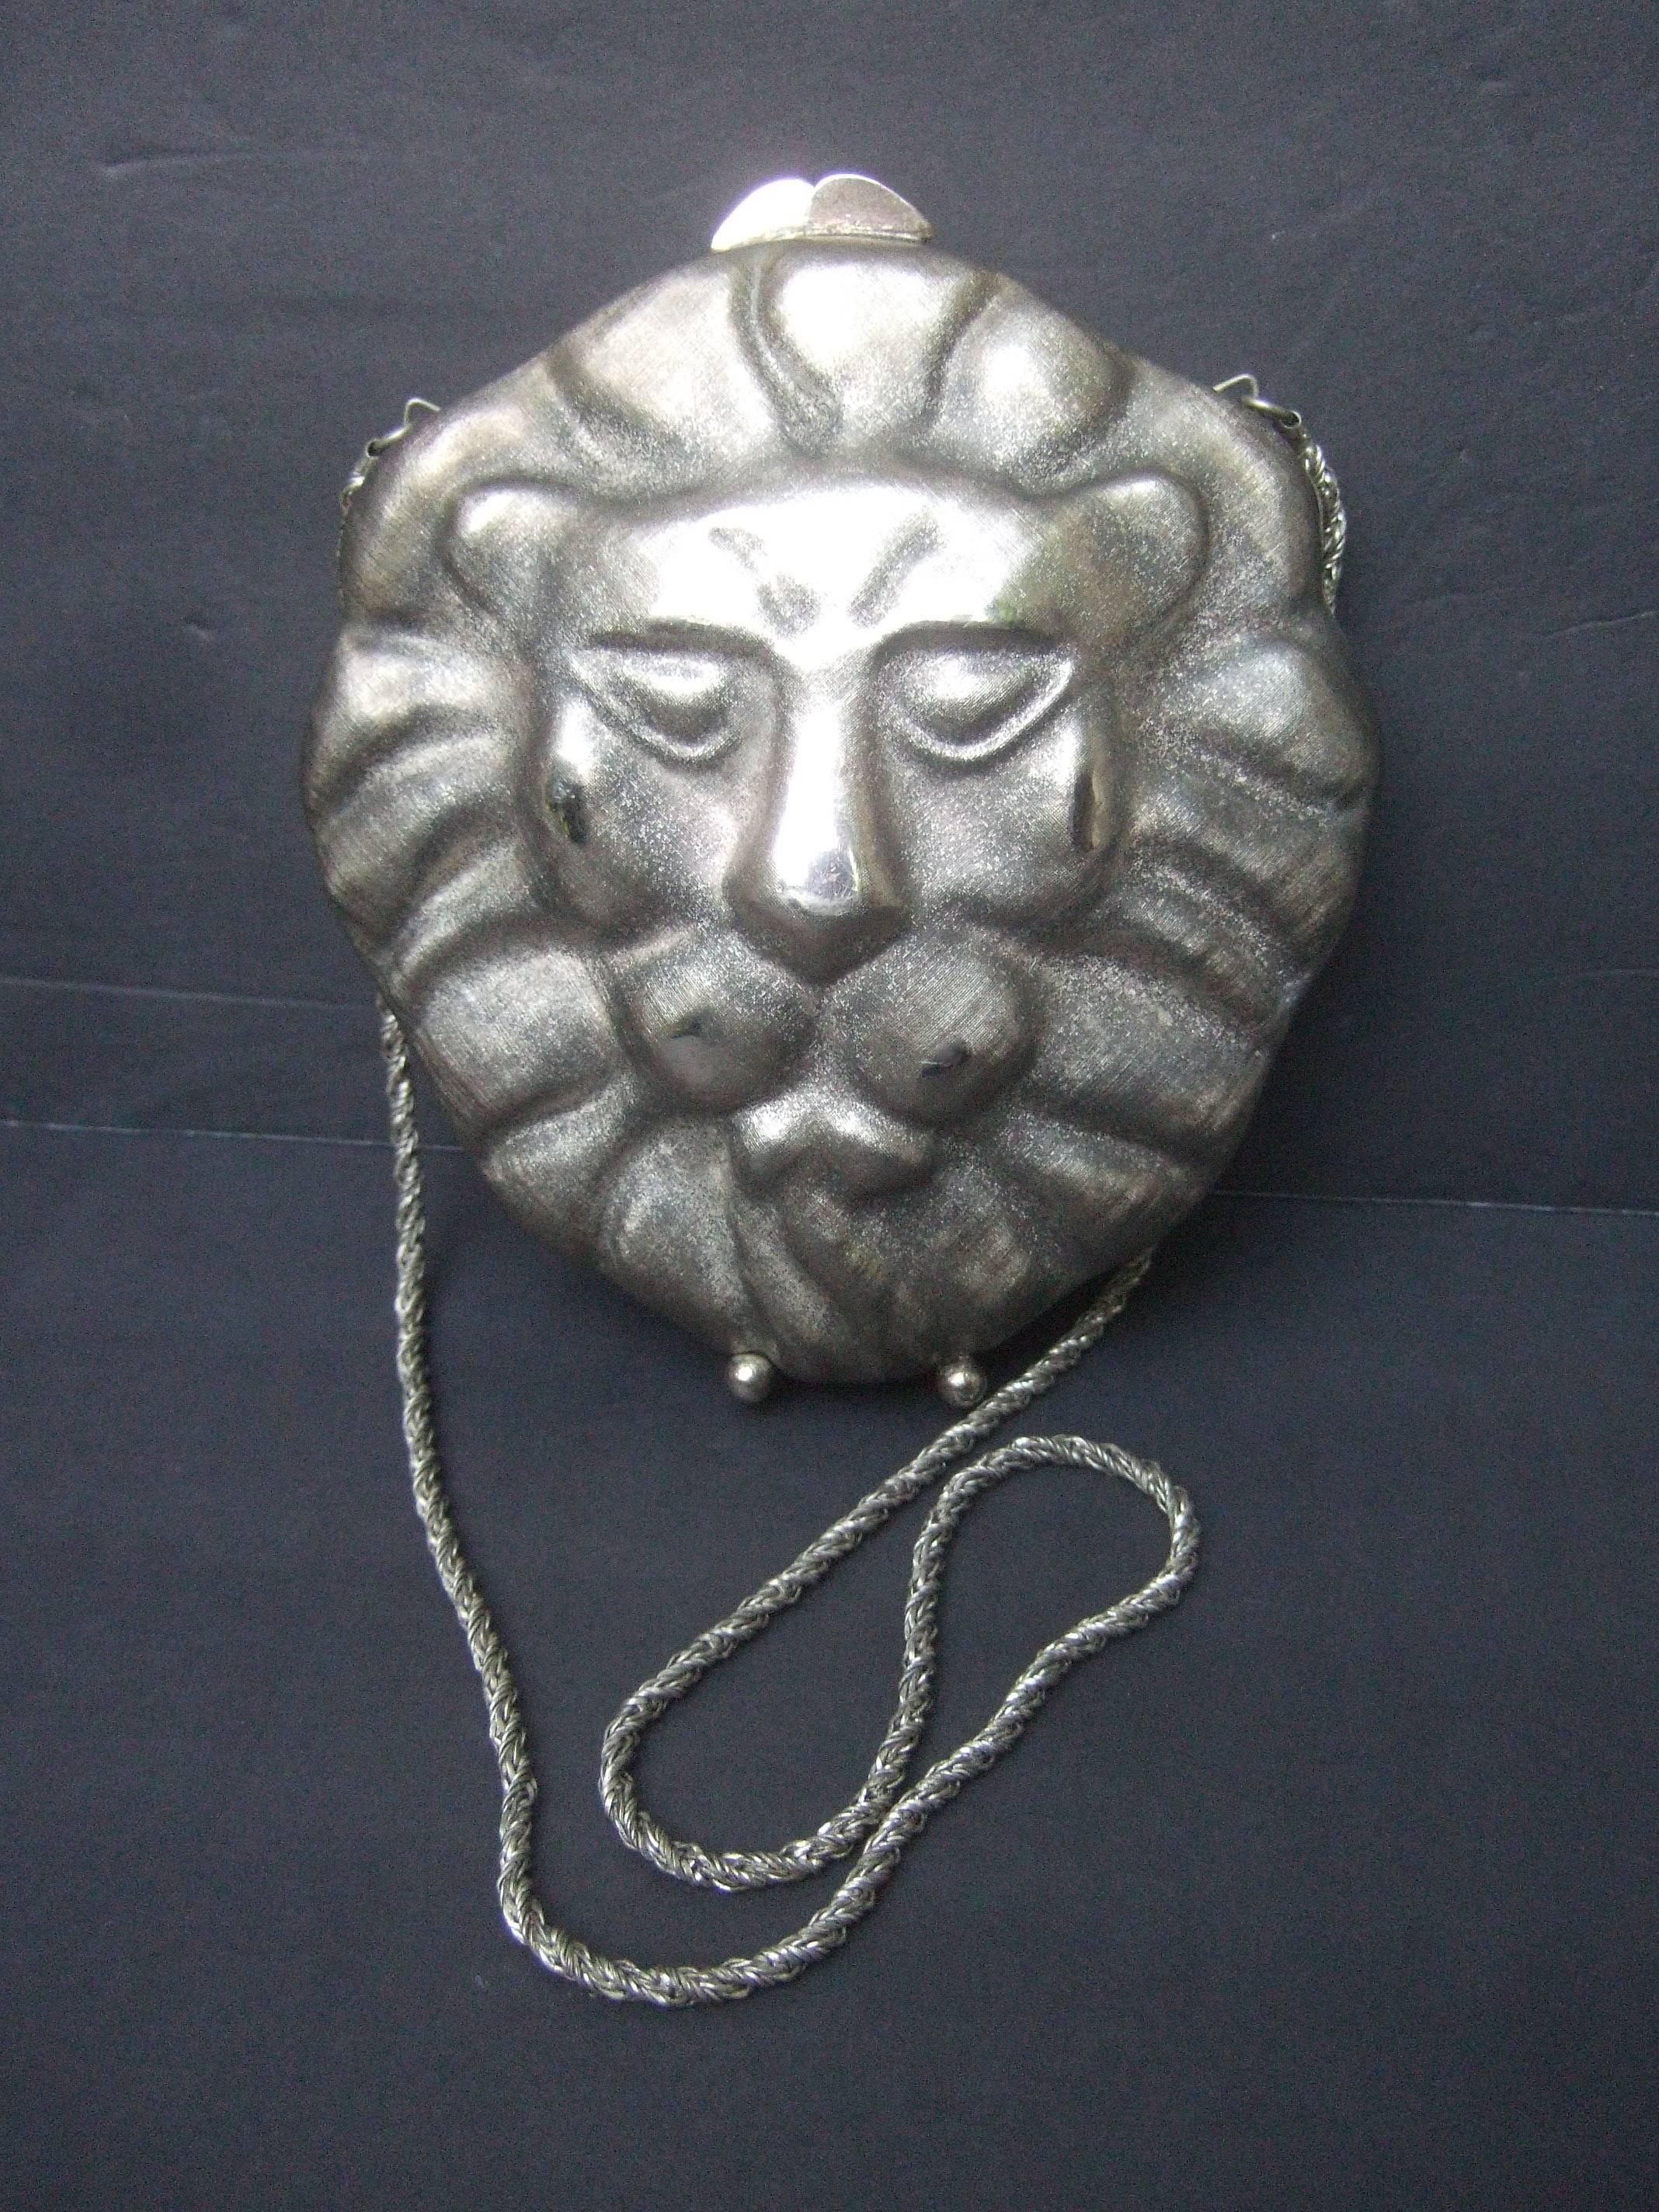 Neiman Marcus Silver metal lion evening bag c 1970s 
The opulent metal purse is designed with a majestic
lion's face on both exterior covers

The lion's face and mane are distinguished with a 
combination of shiny silver tone metal